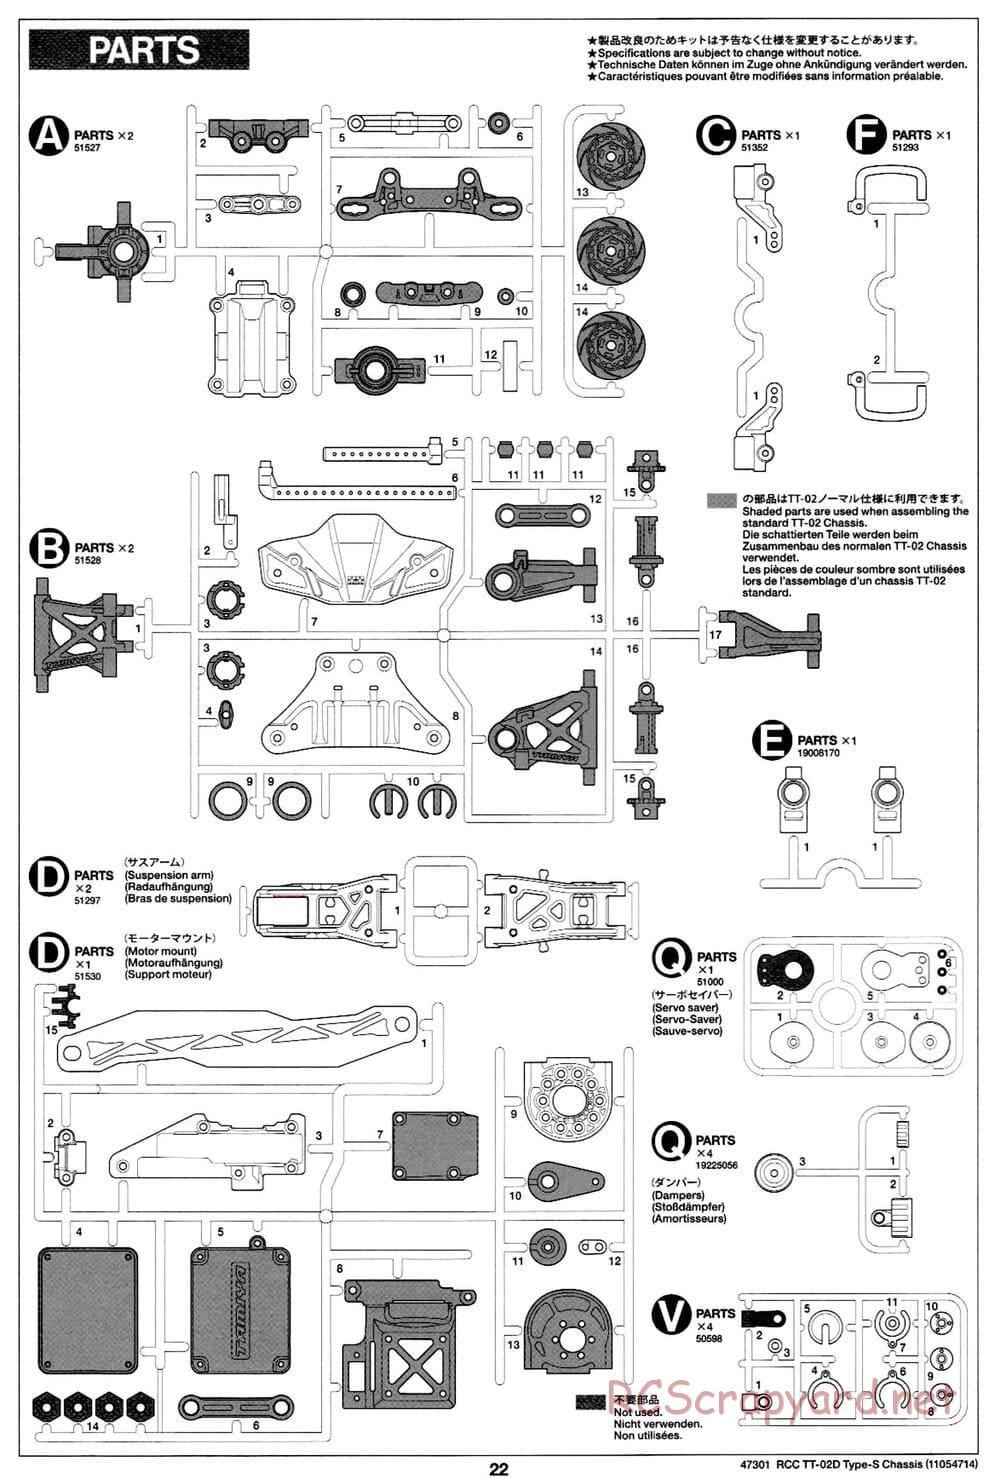 Tamiya - TT-02D Type-S Chassis - Manual - Page 22